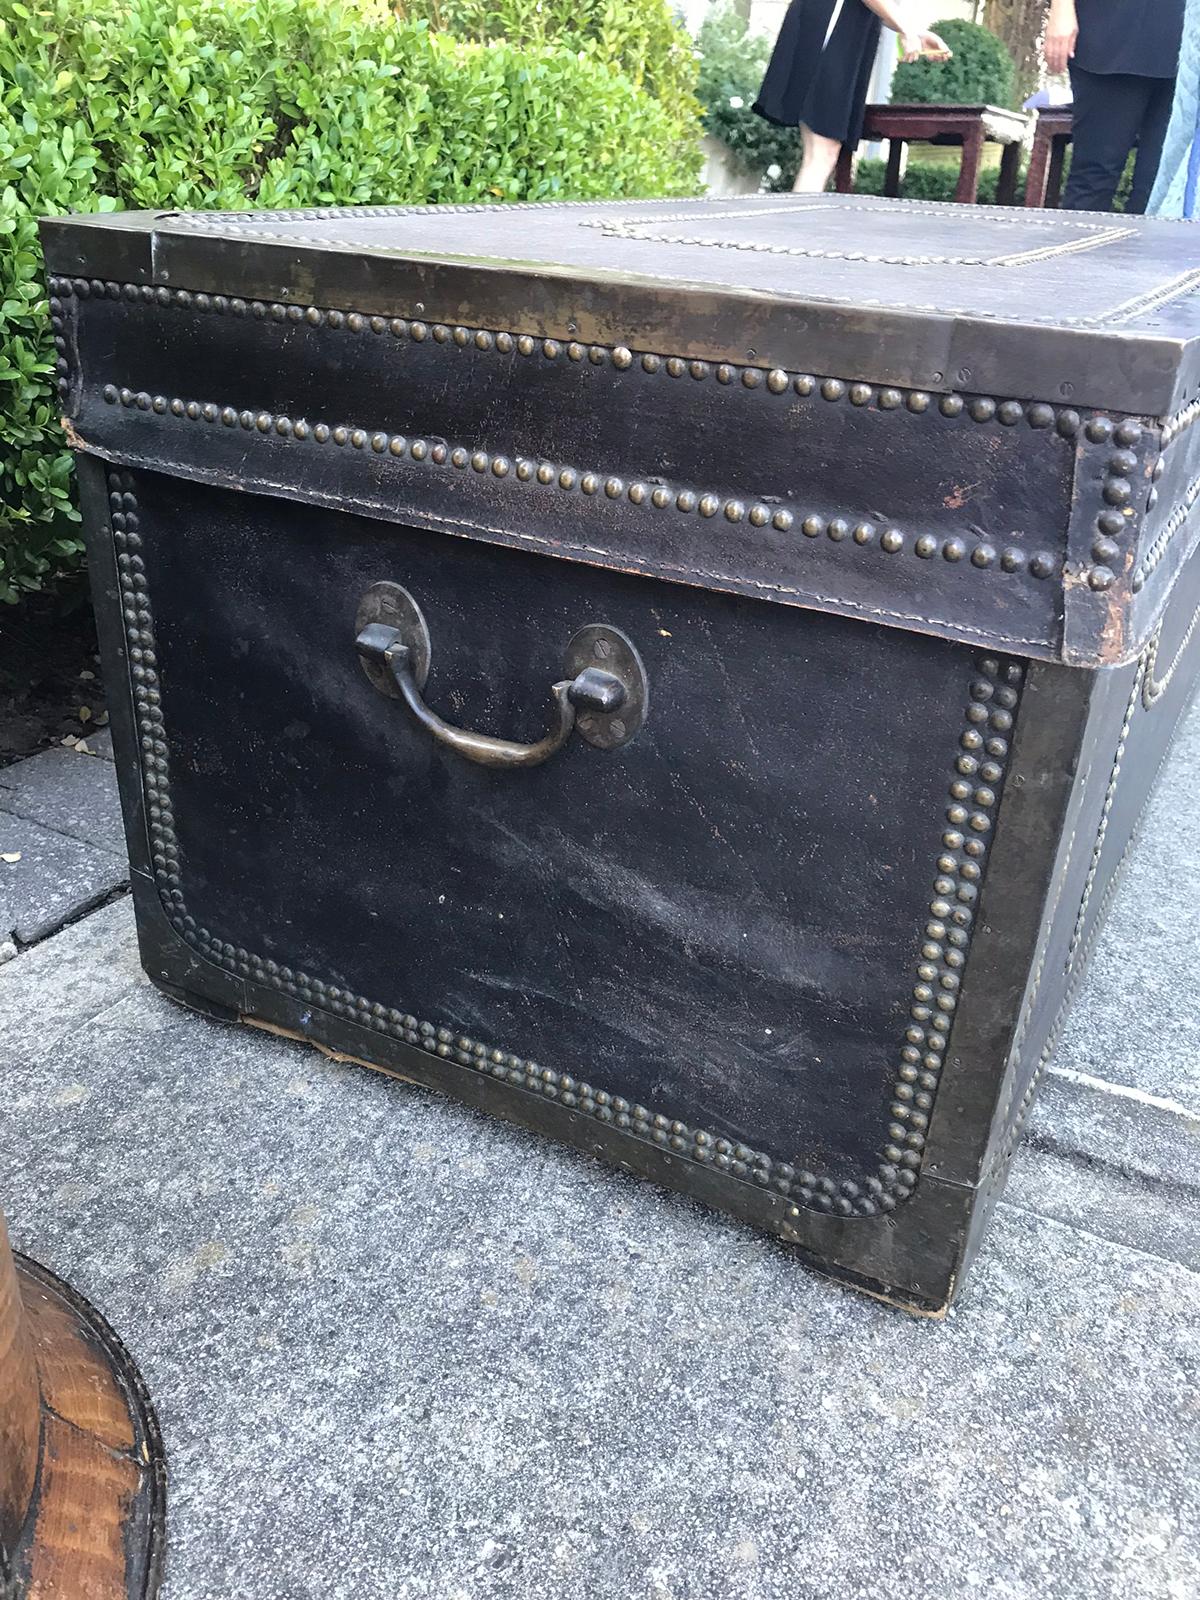 English Regency Camphor Wood and Black Leather Covered Trunk, circa 1810s-1820s For Sale 2